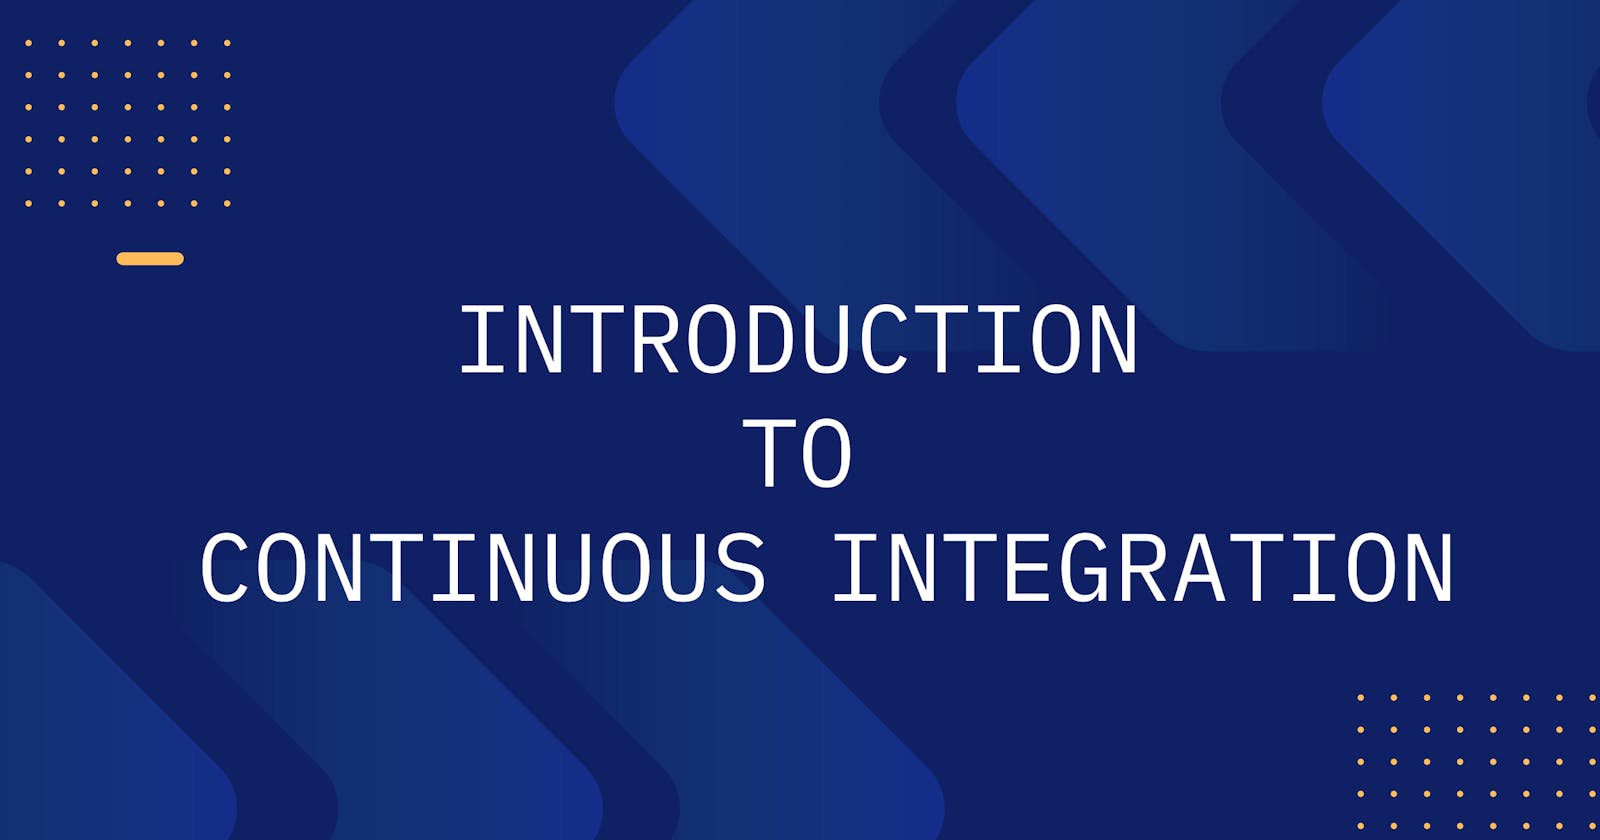 Introduction to Continuous Integration